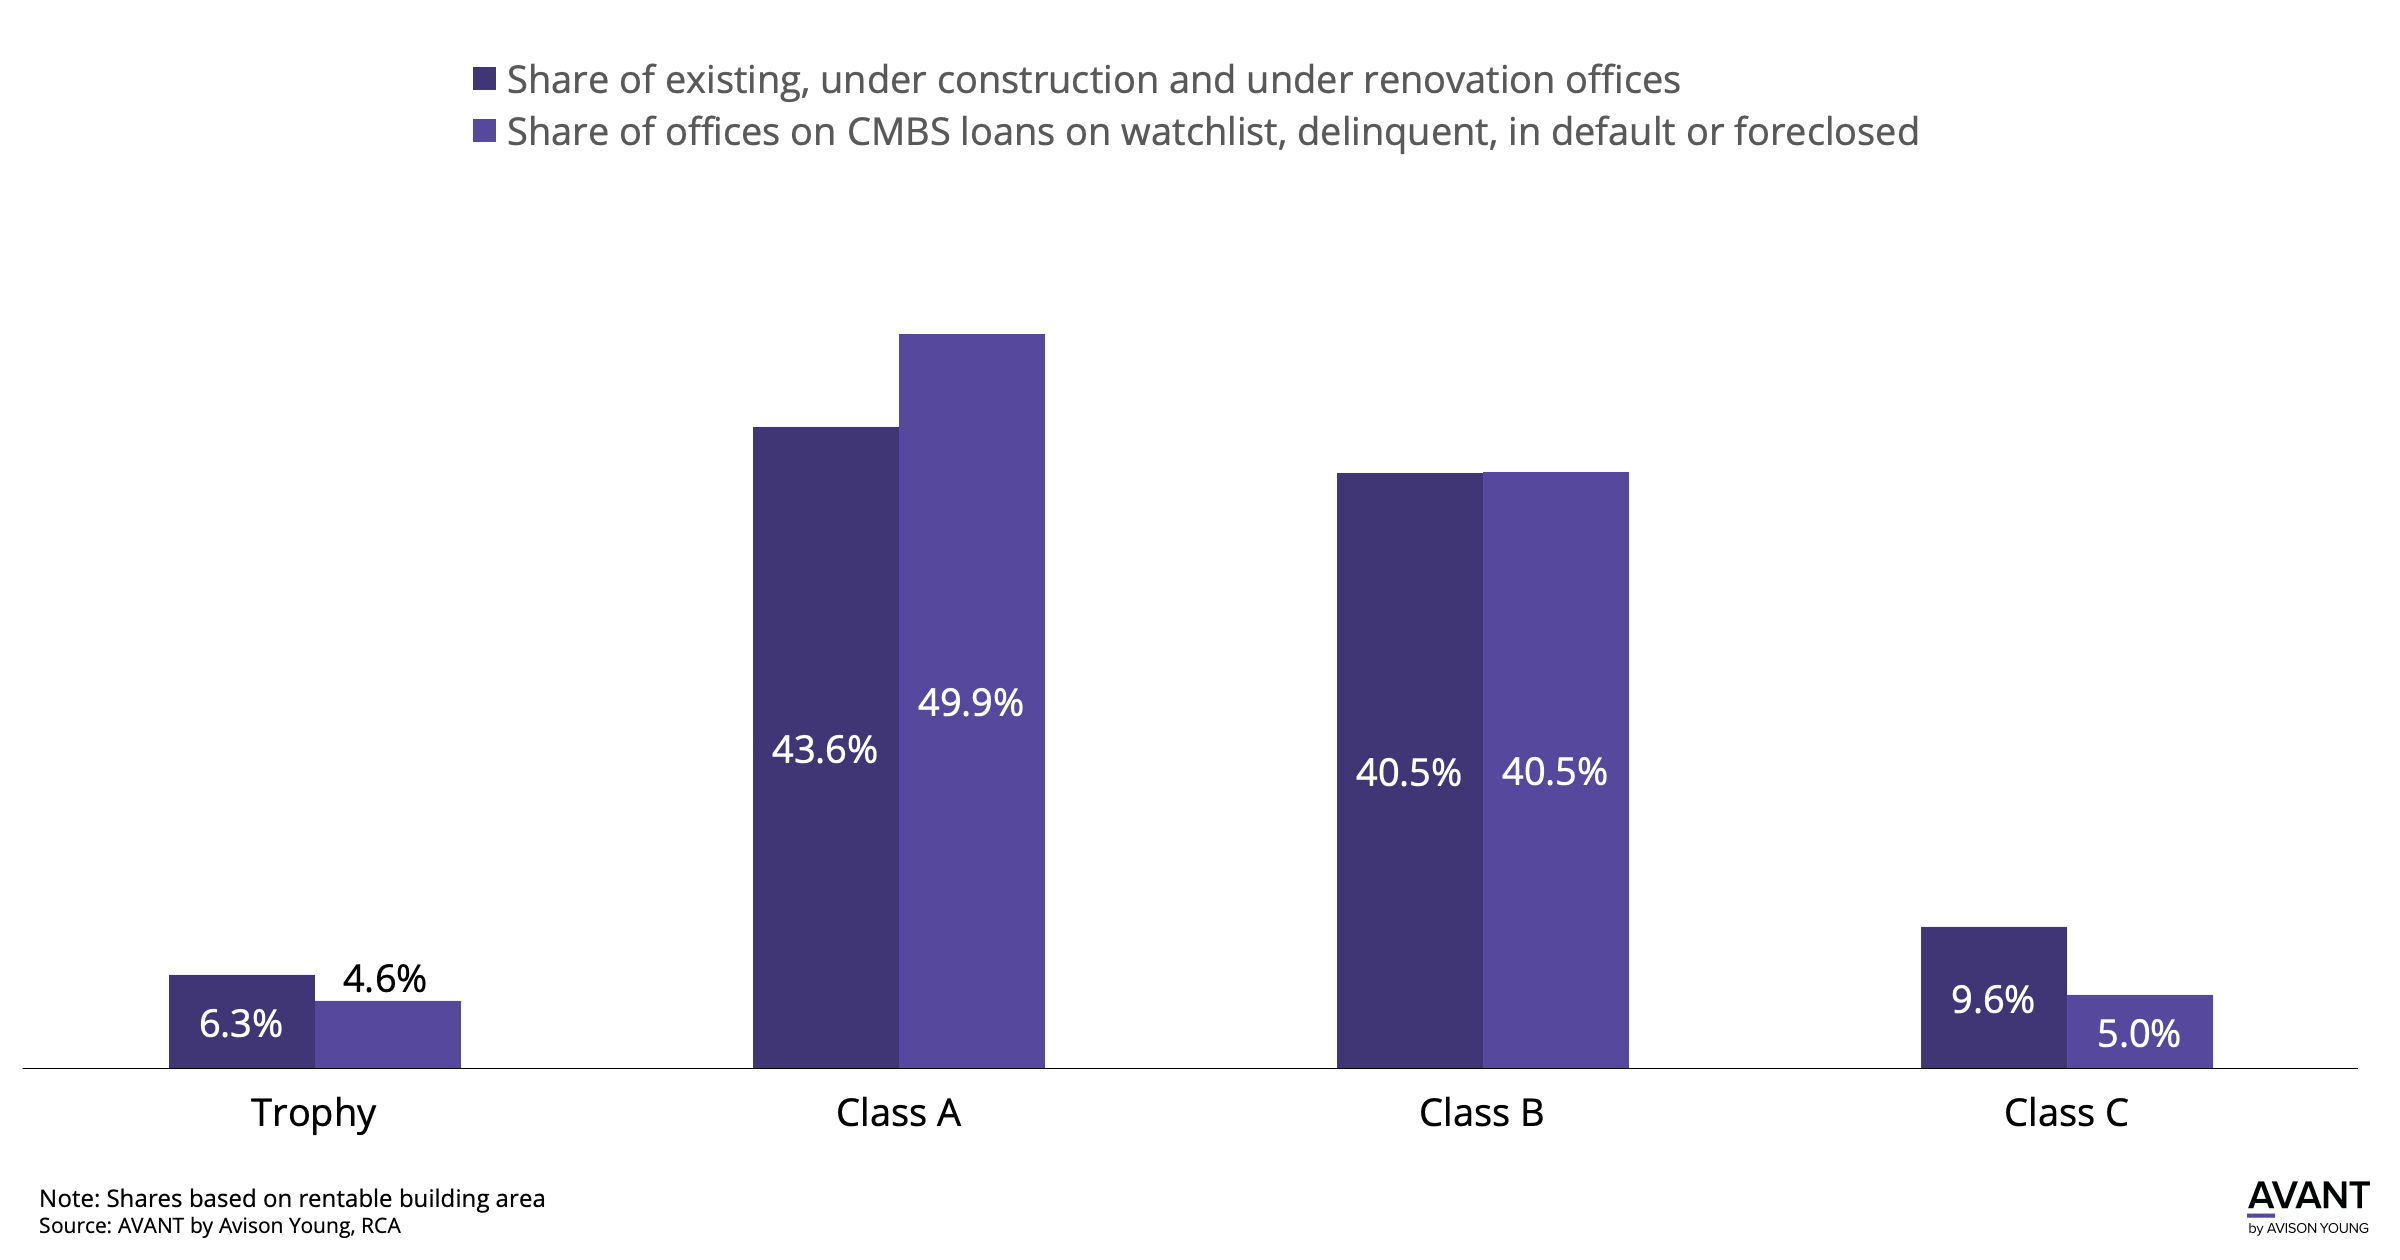 Bar graph of trophy, class a, class b and class c buildings under construction and renovation compared to offices on CMBS loans on watch list, delinquent, default or foreclosed.